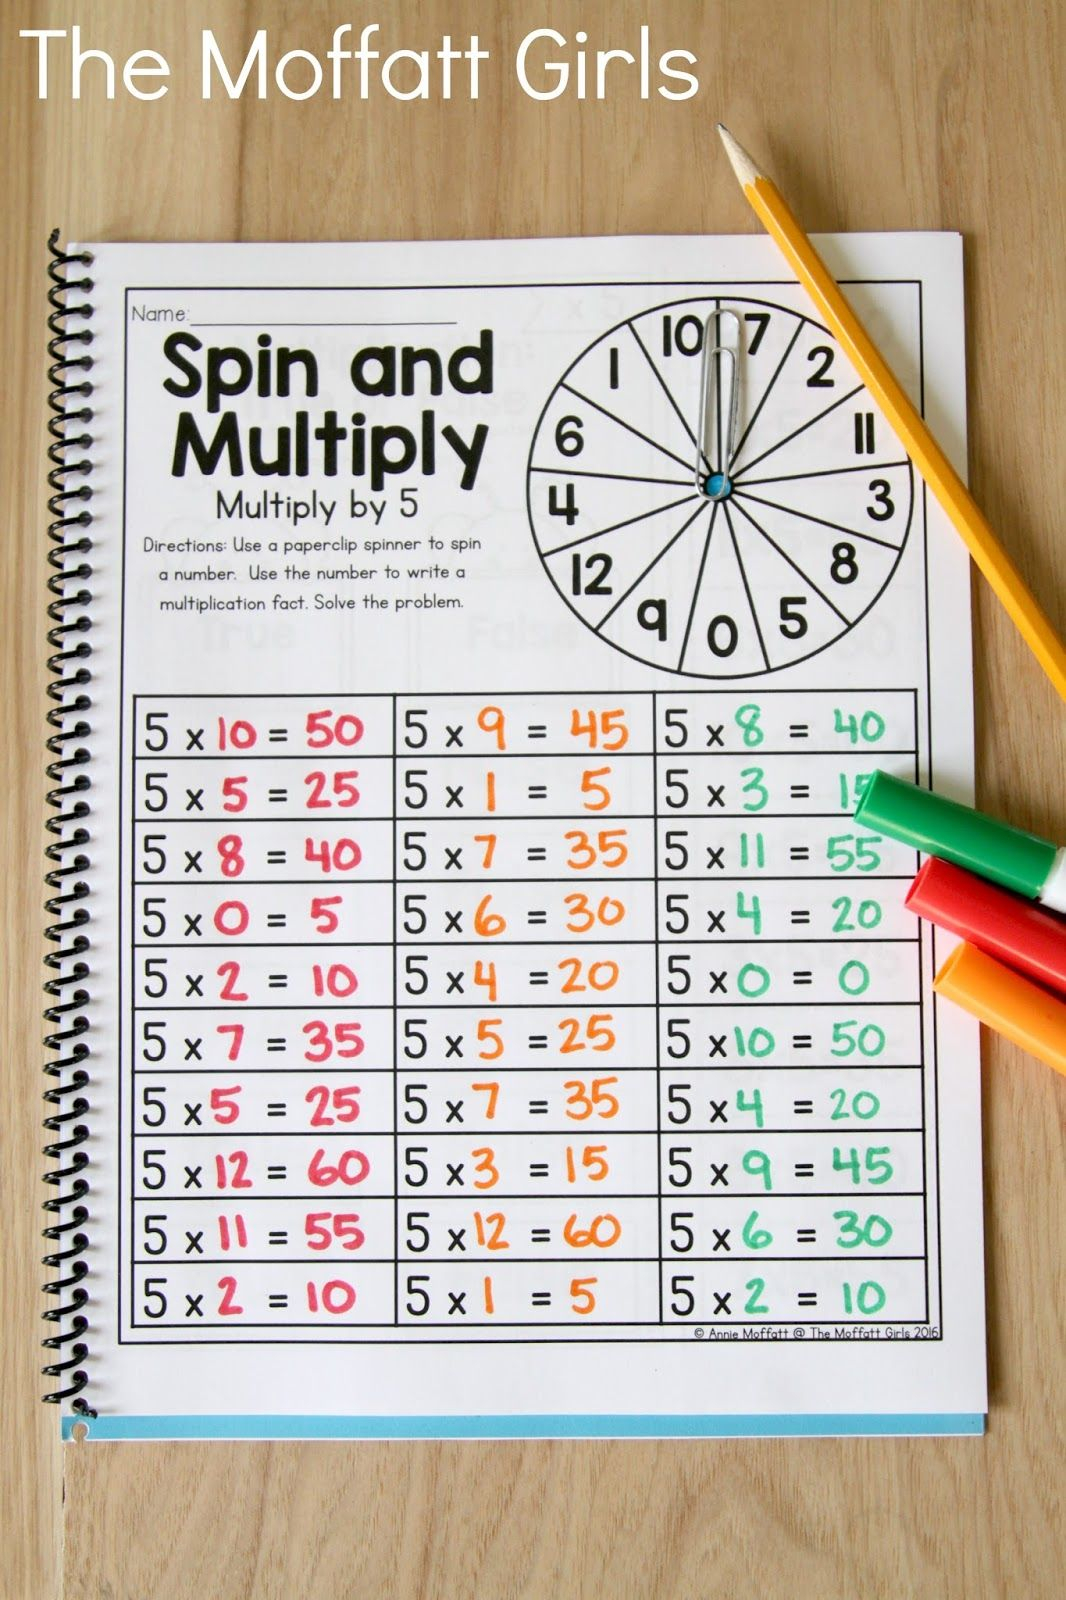 Fun Practice Multiplication Facts Free Worksheets